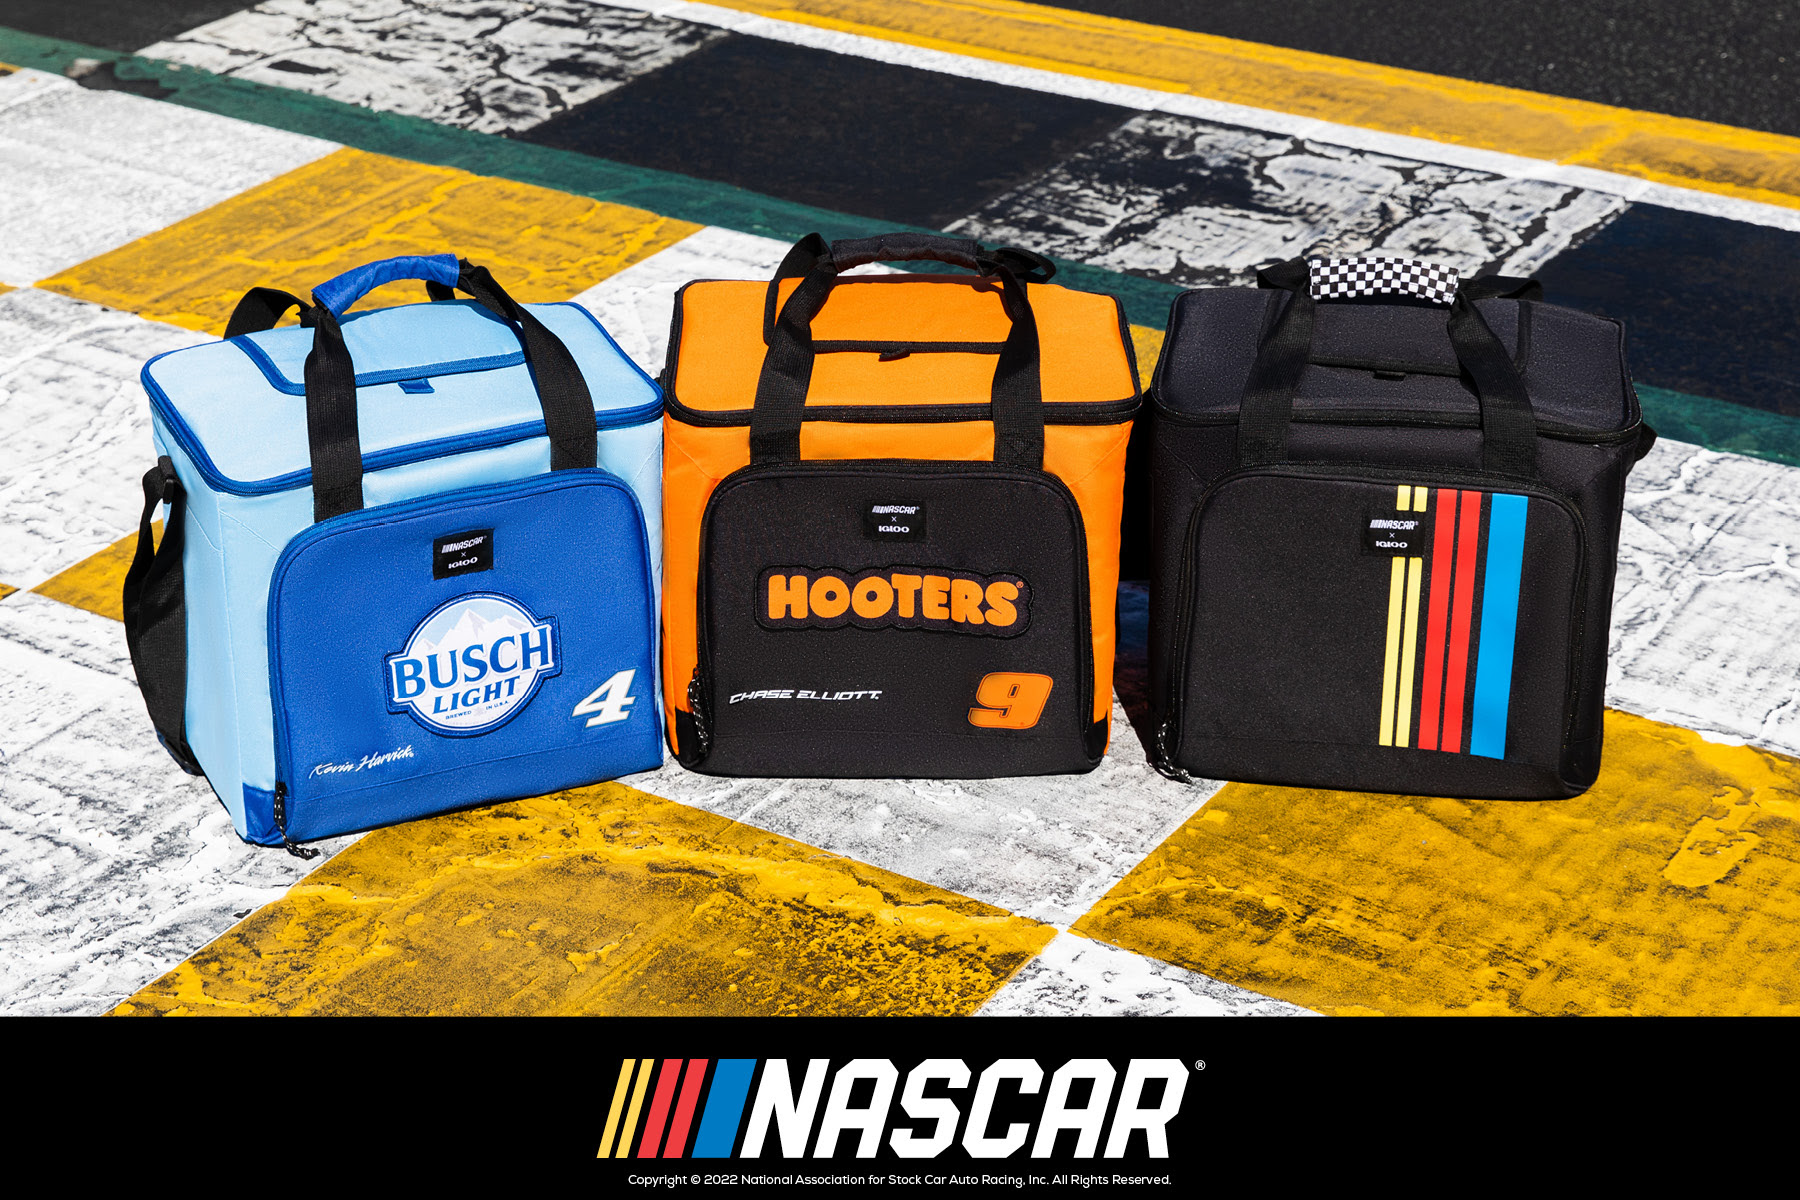 IGLOO EXPANDS ITS NASCAR® SERIES WITH TRACKSIDE-APPROVED COOLER BAGS